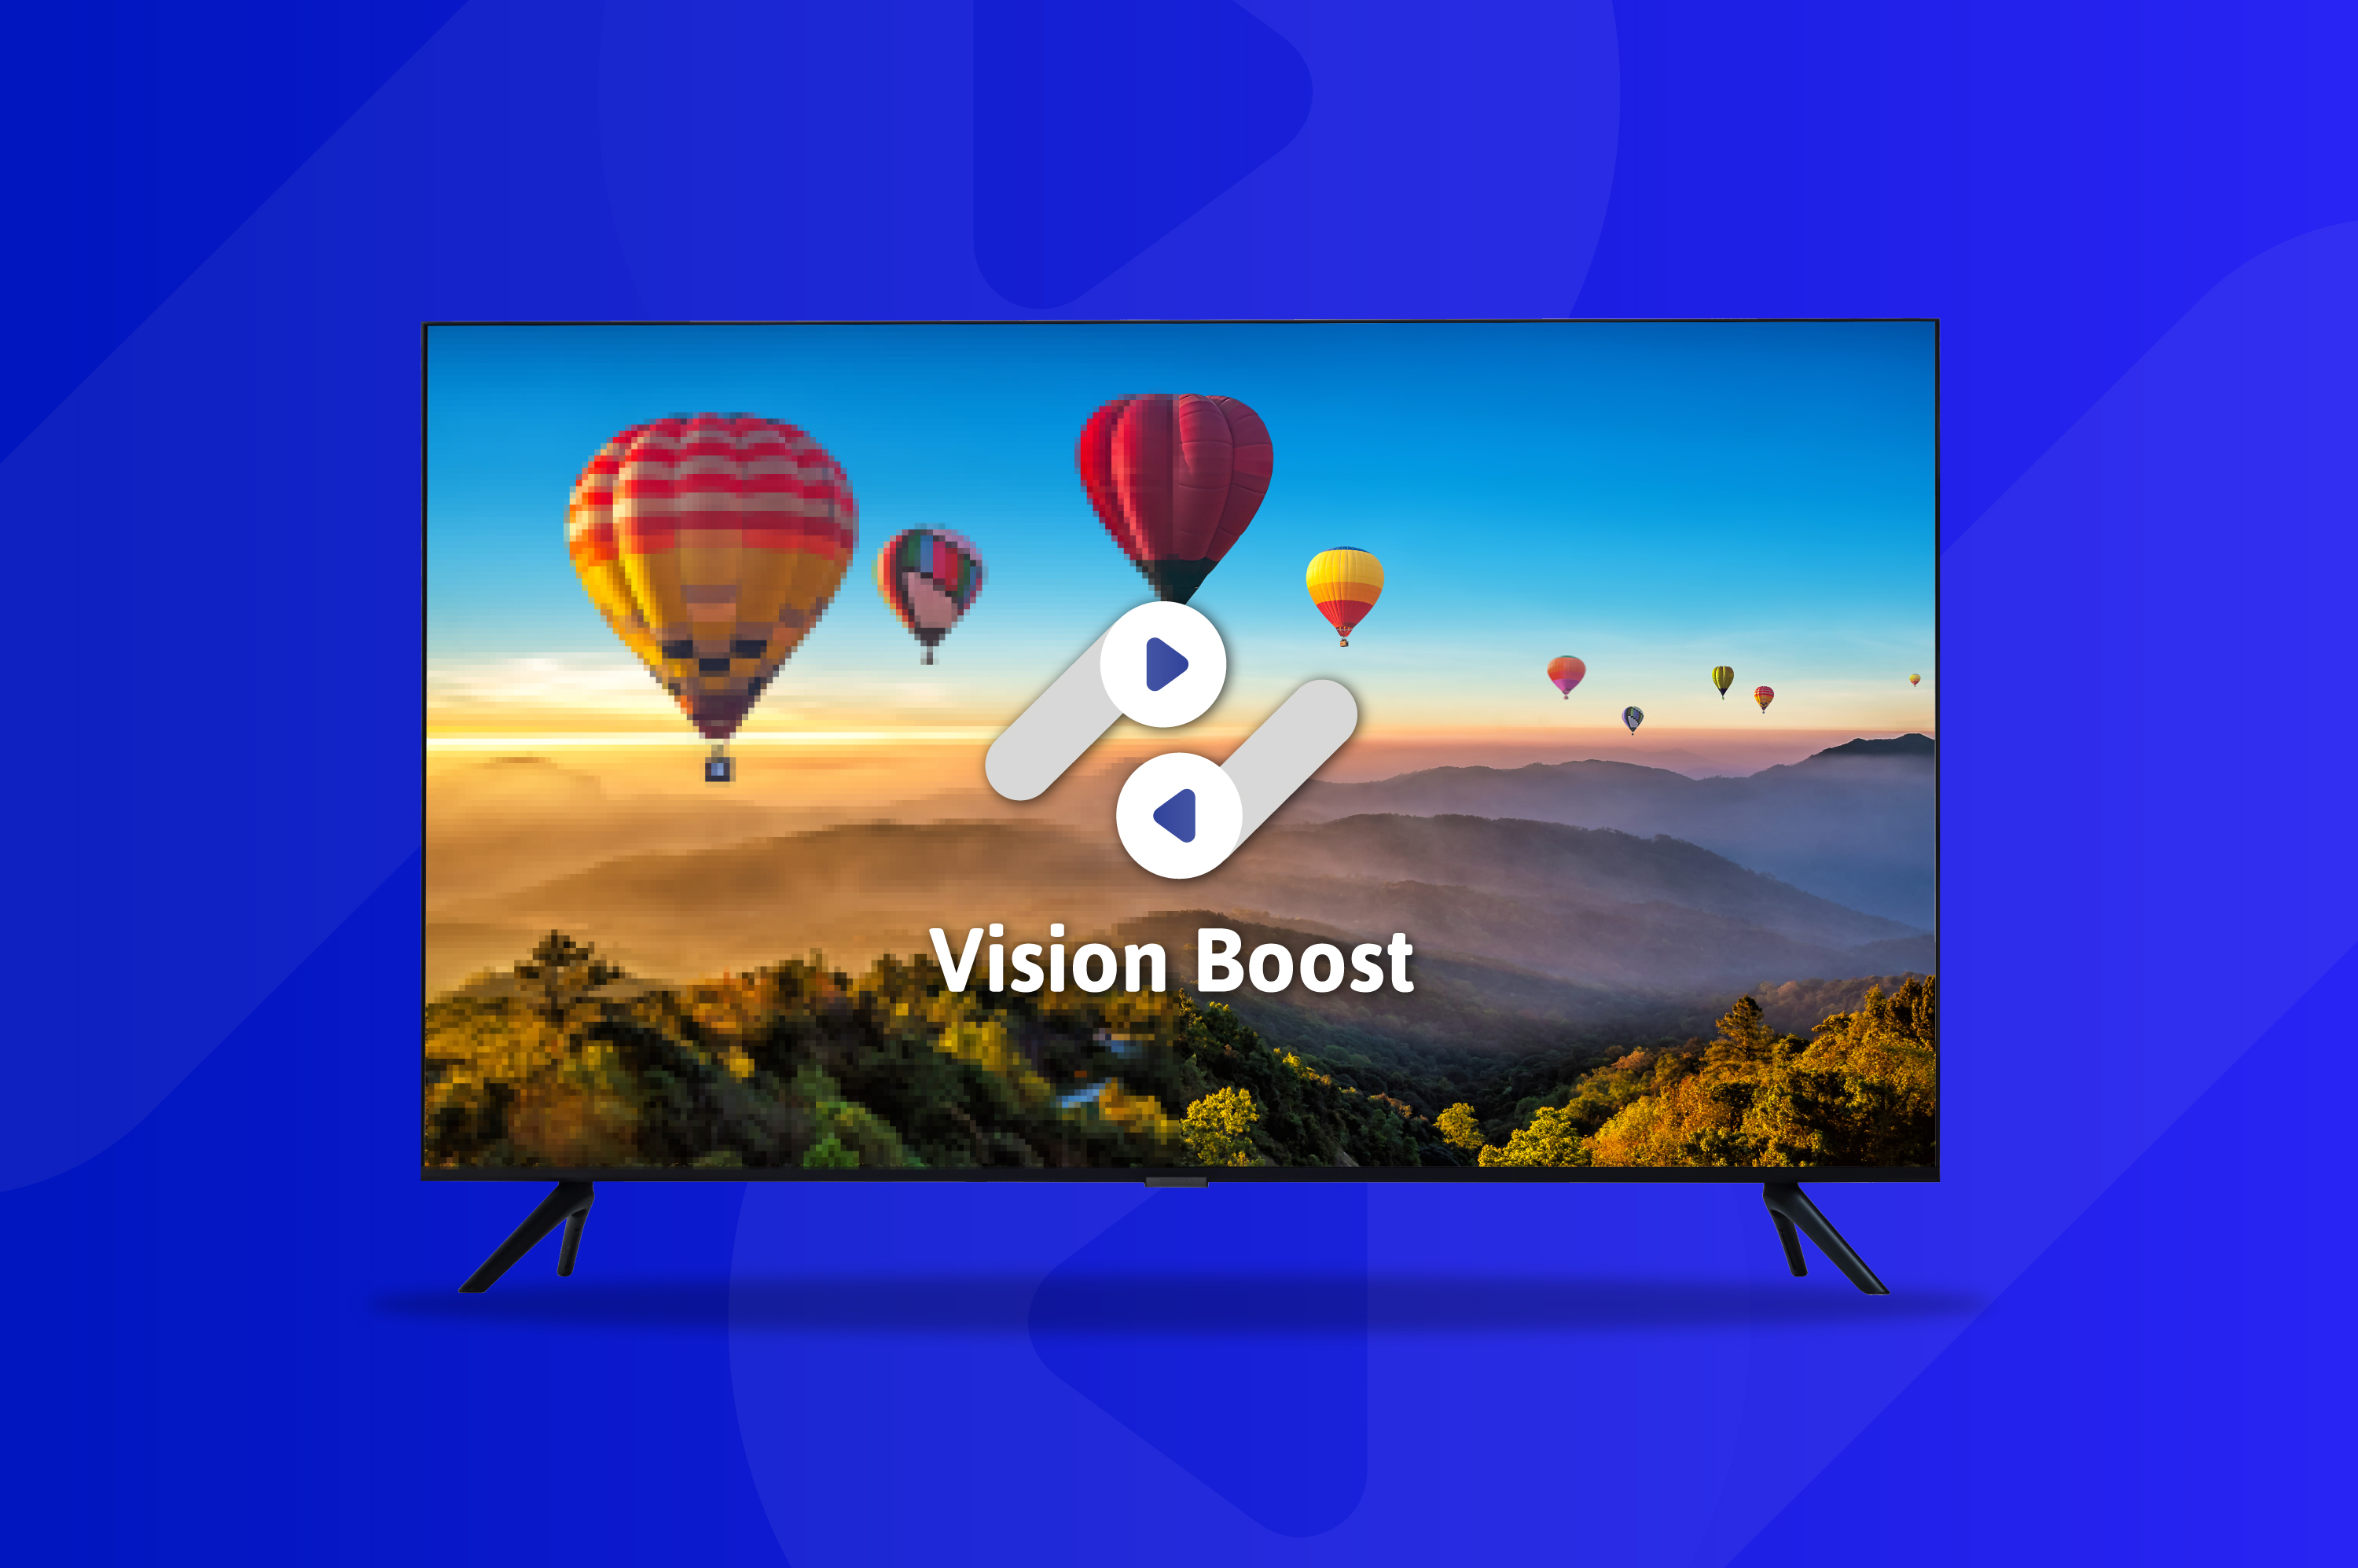 TV with enhanced image and Vision Boost logo